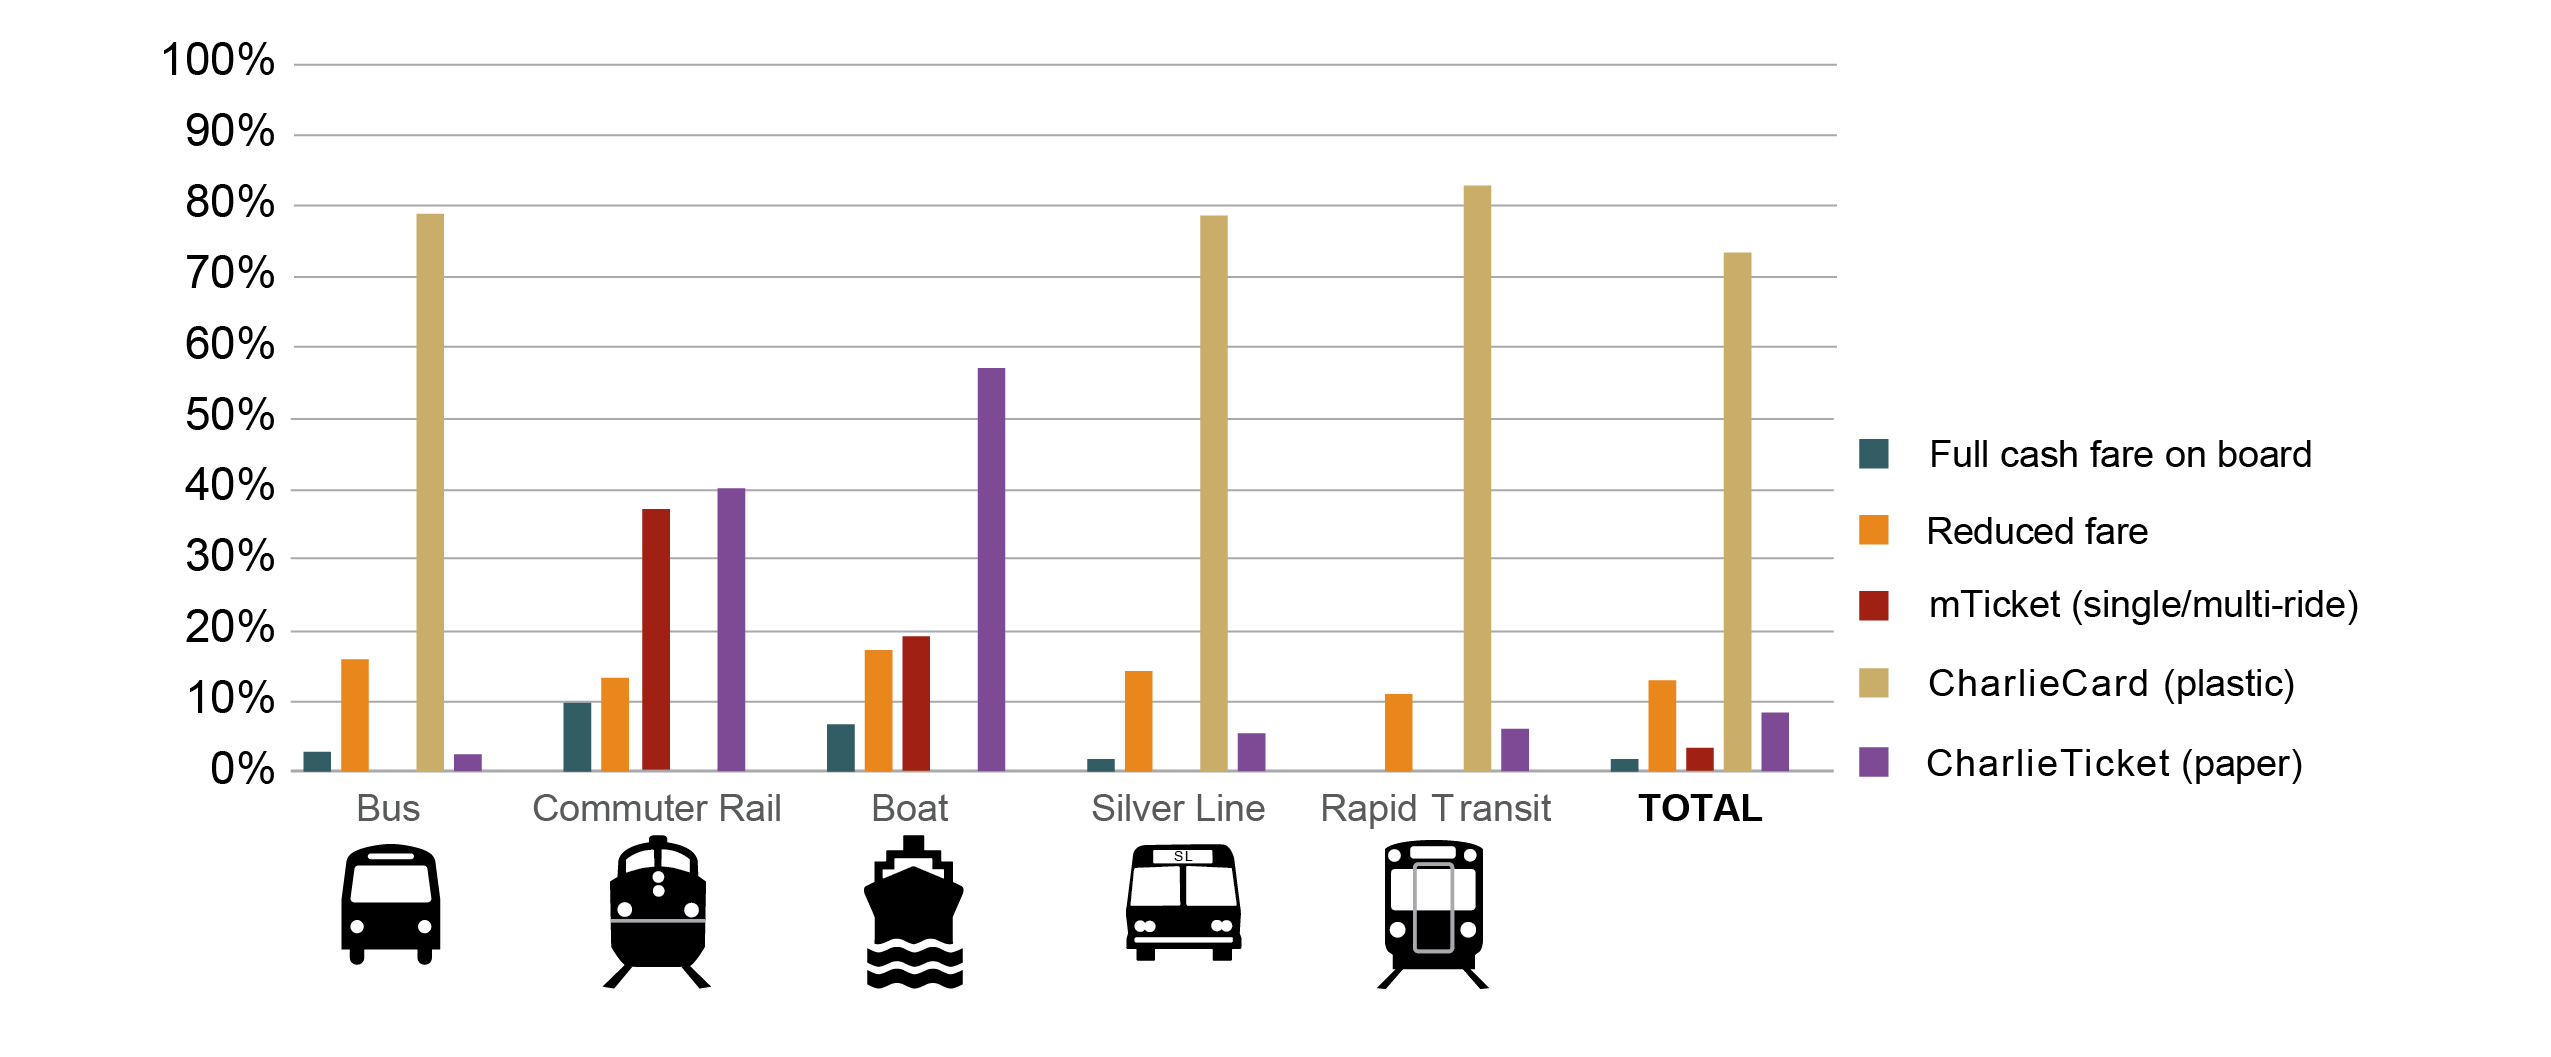 Figure 14 is a series of bar graphs showing the distributions of types of pay-per-ride payments reported by passengers who used pay-per-ride options on each MBTA service mode in the 2015-17 survey.